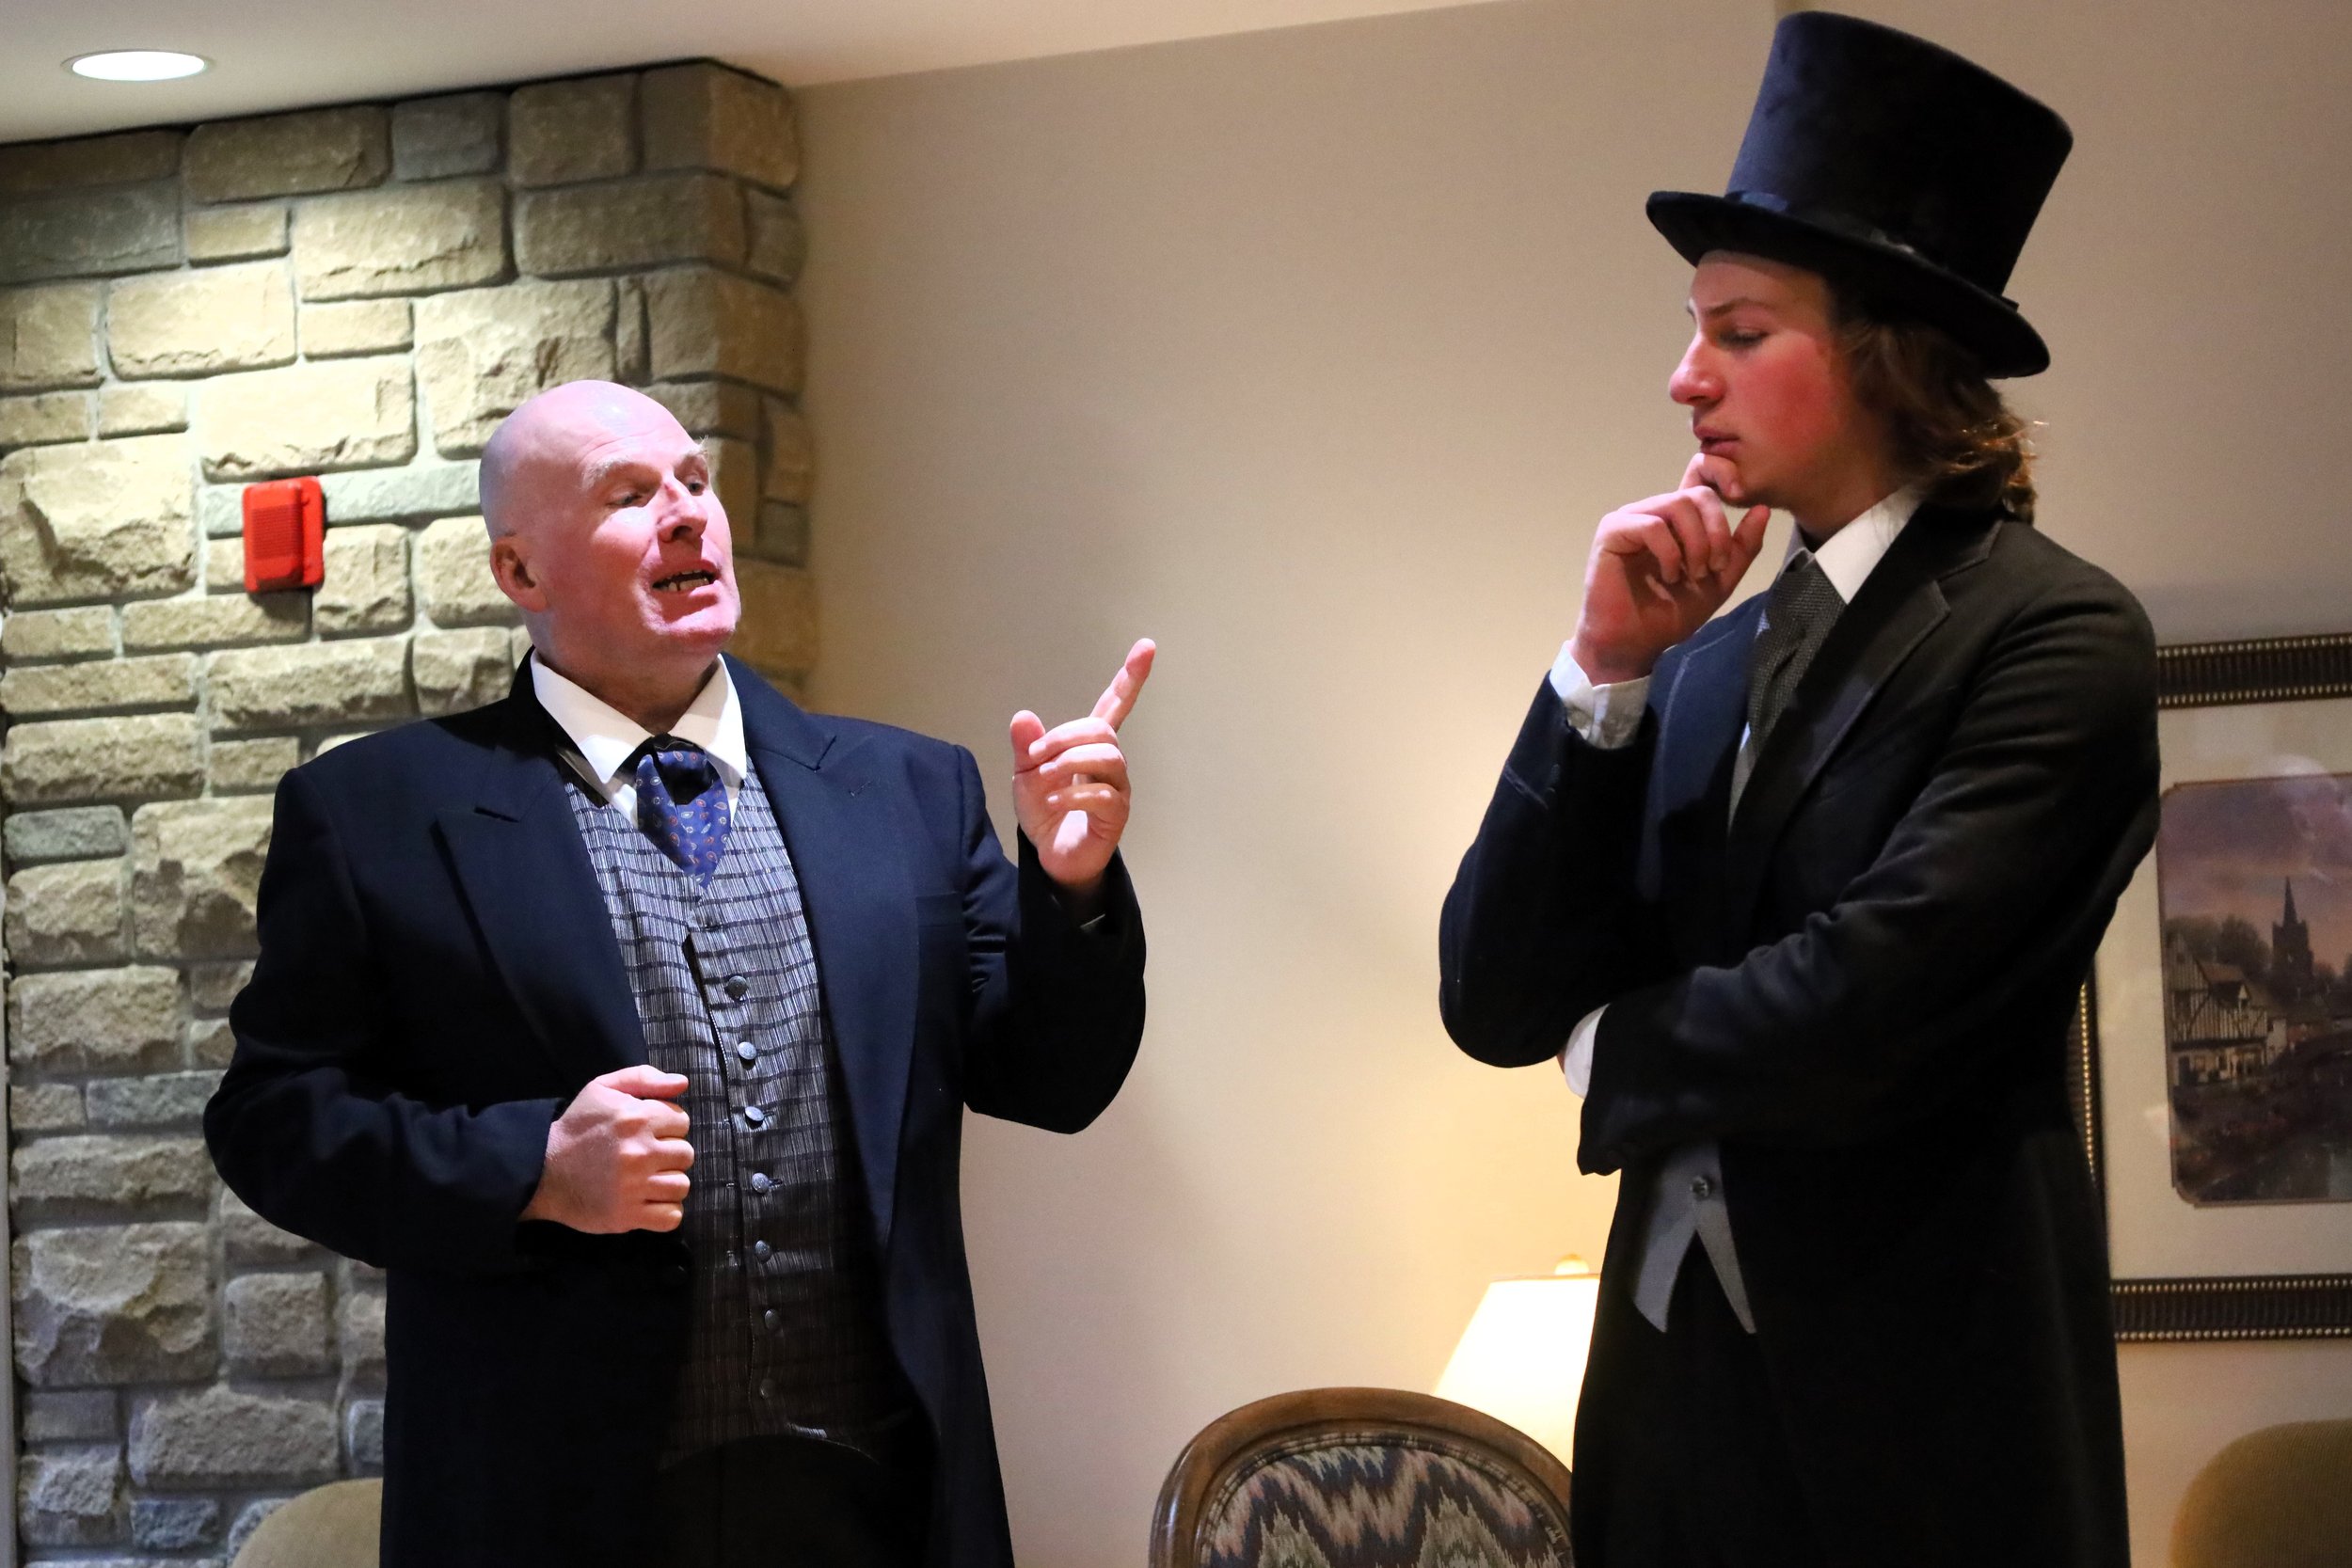 Nathan Govier as Lord Kingston (left) with Lucas Pronk as Peter Robinson (right).